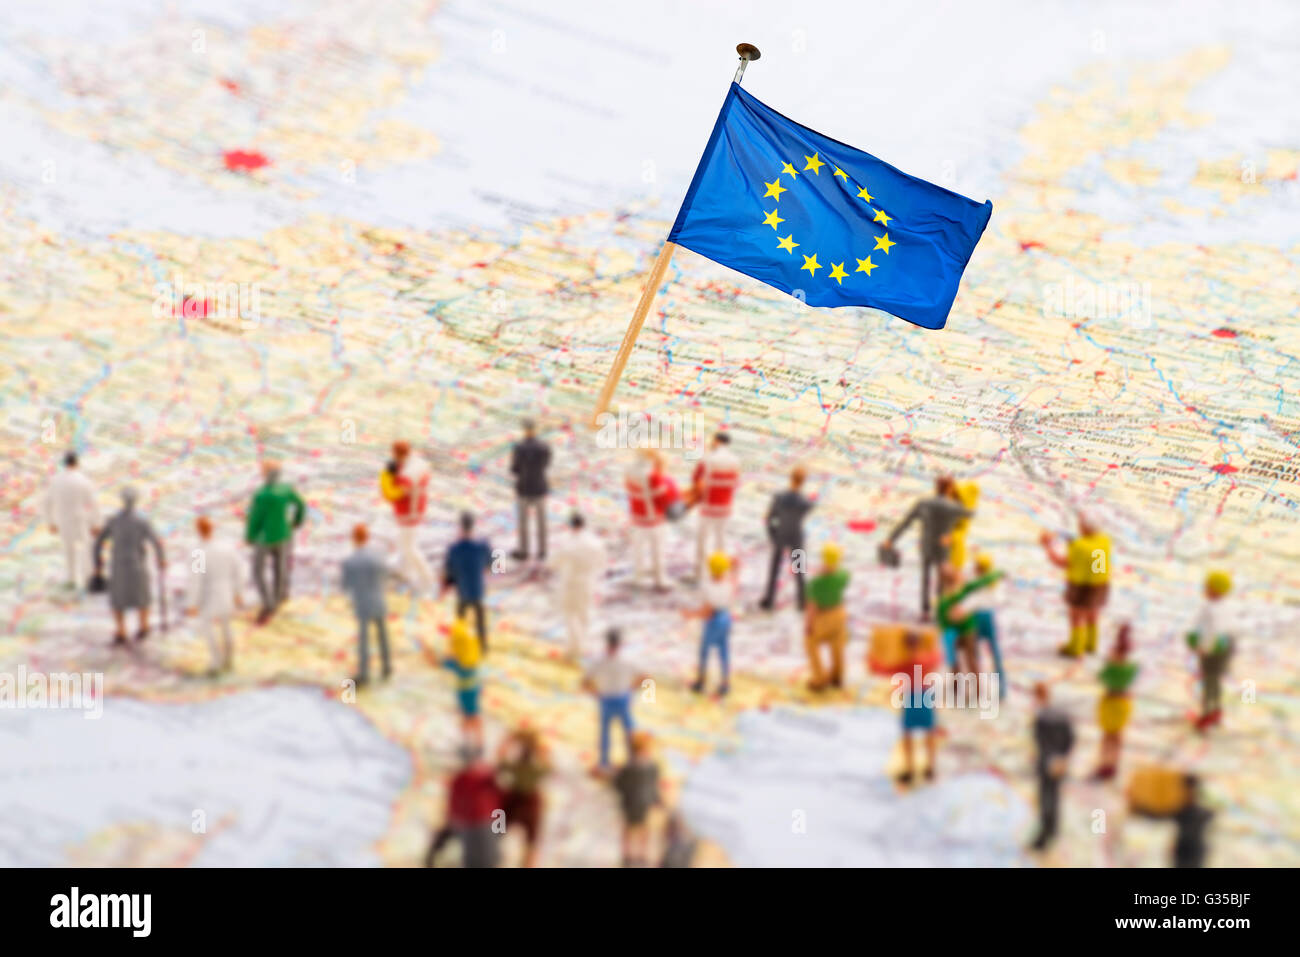 Europe map with European flag and a large group of figures. Stock Photo